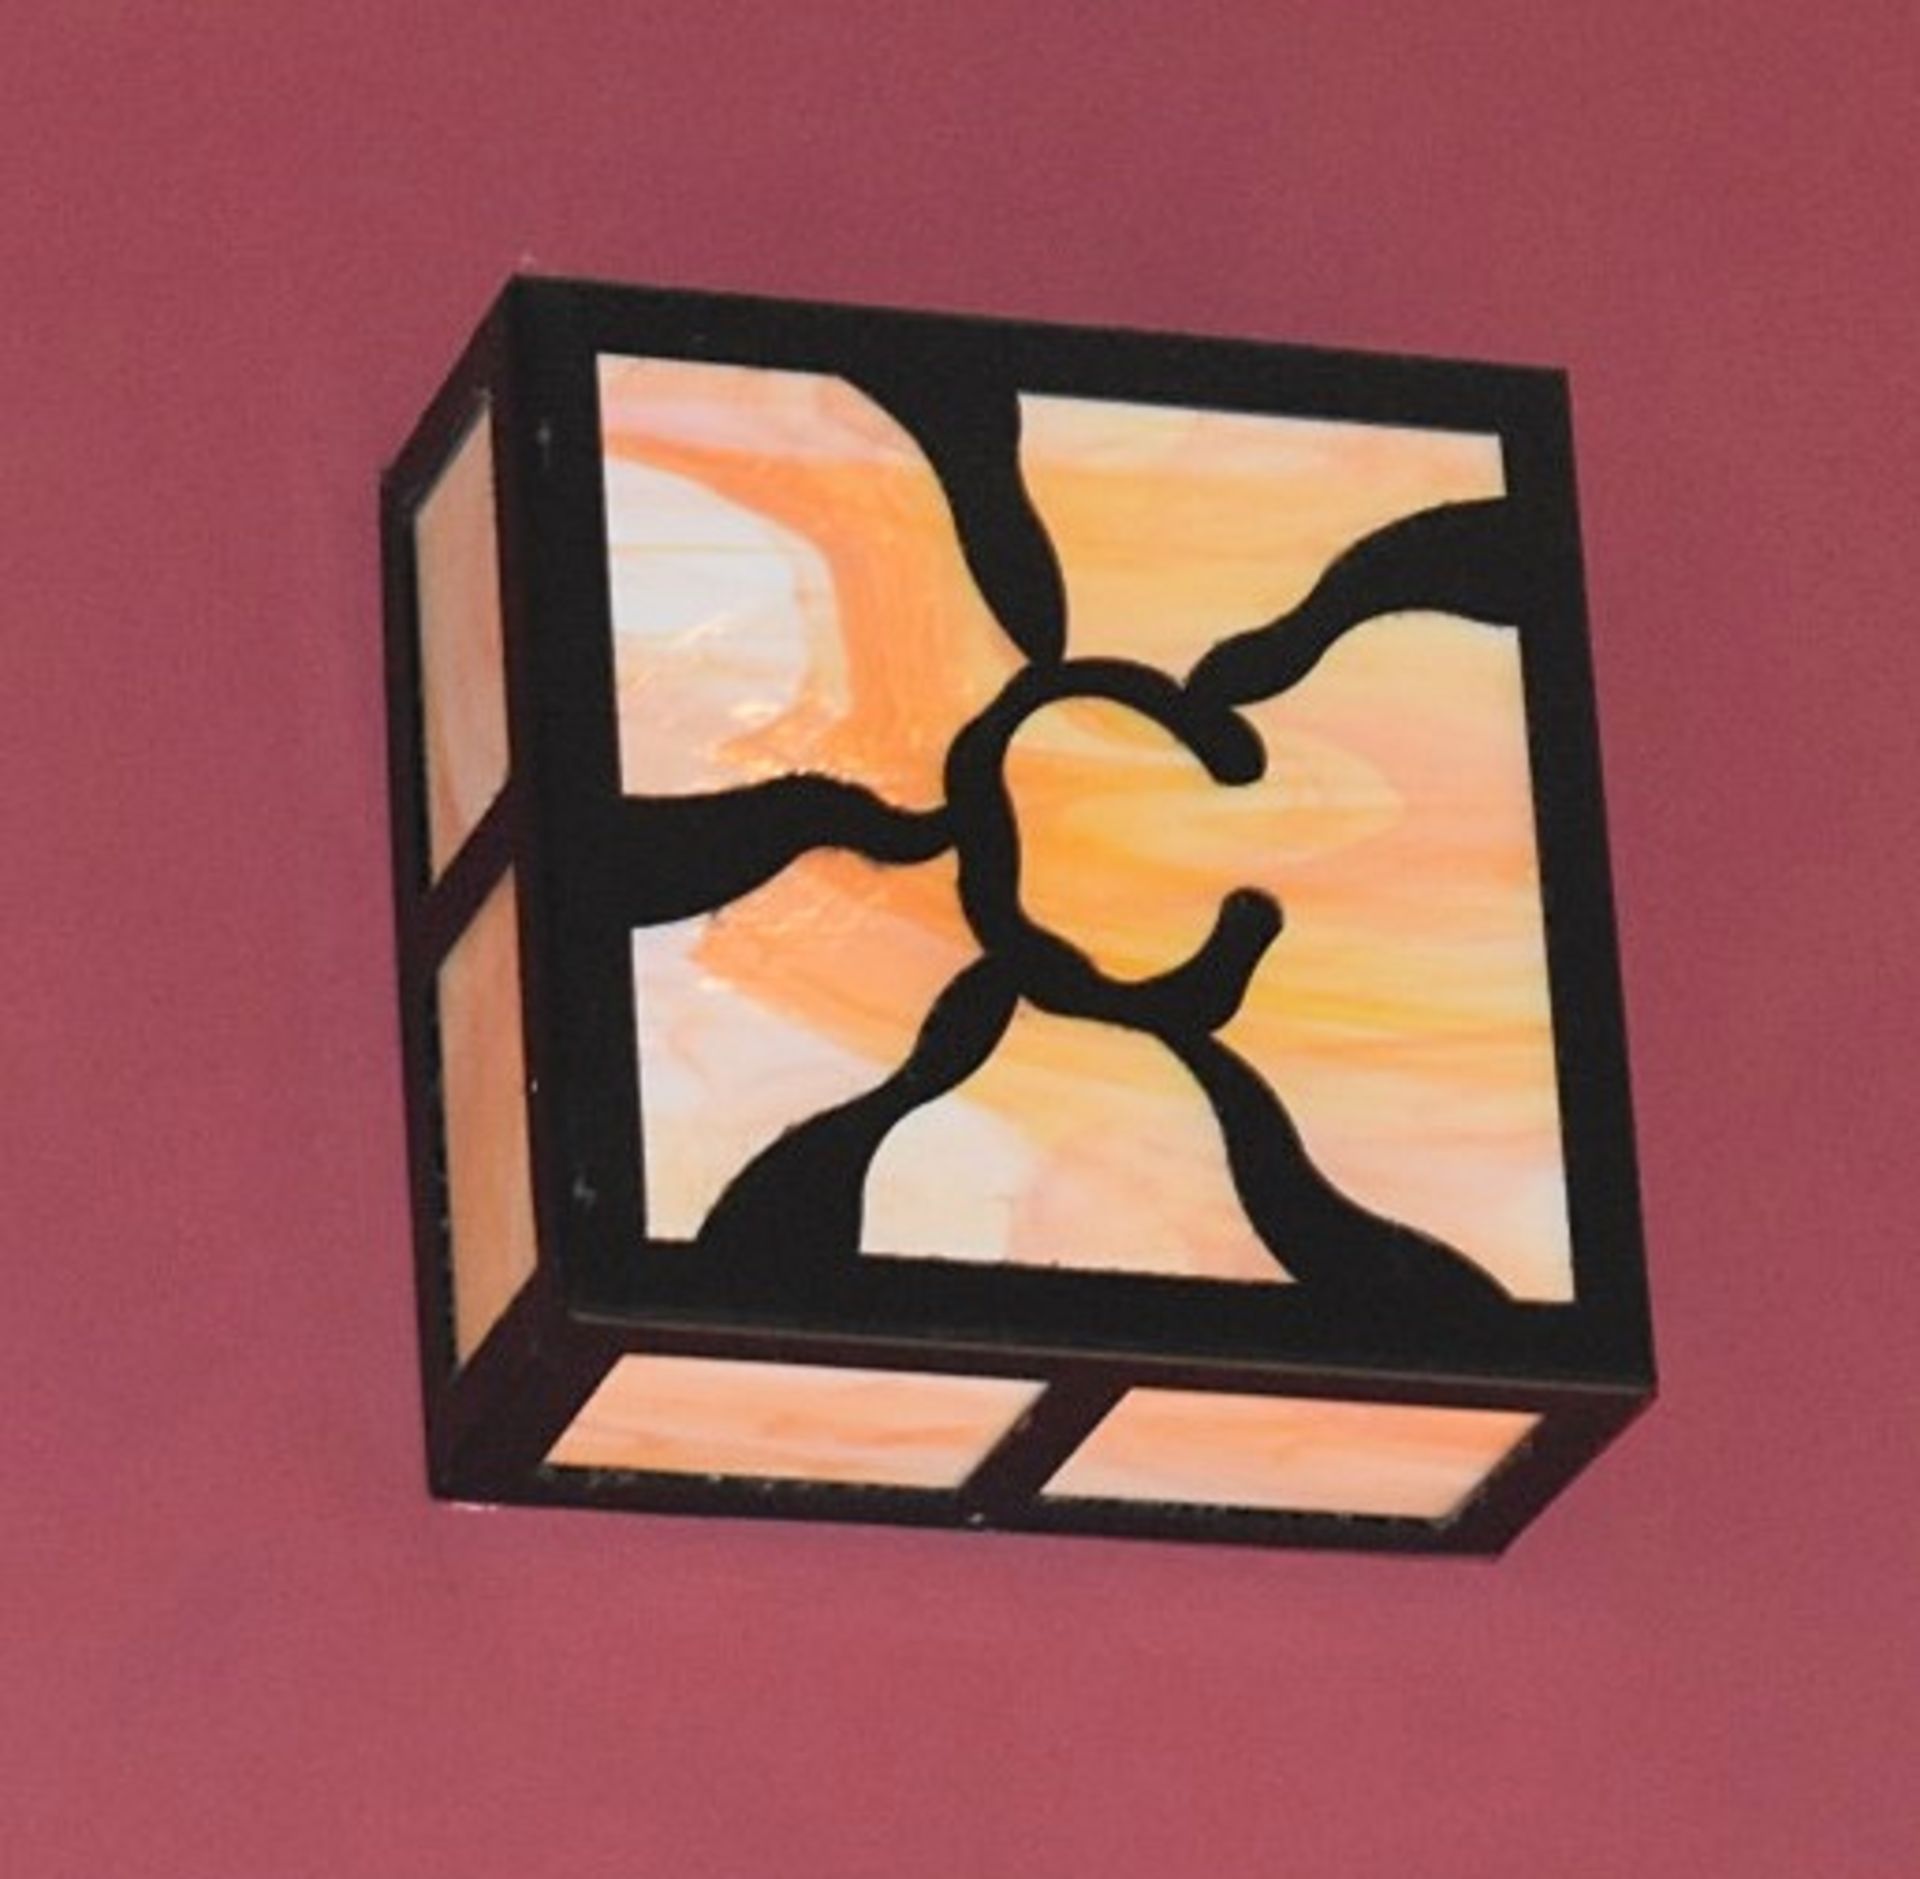 7 x Contemporary Wall / Ceiling Light Fittings - CL423 GF - From a Popular Mexican Themed Restaurant - Image 3 of 5